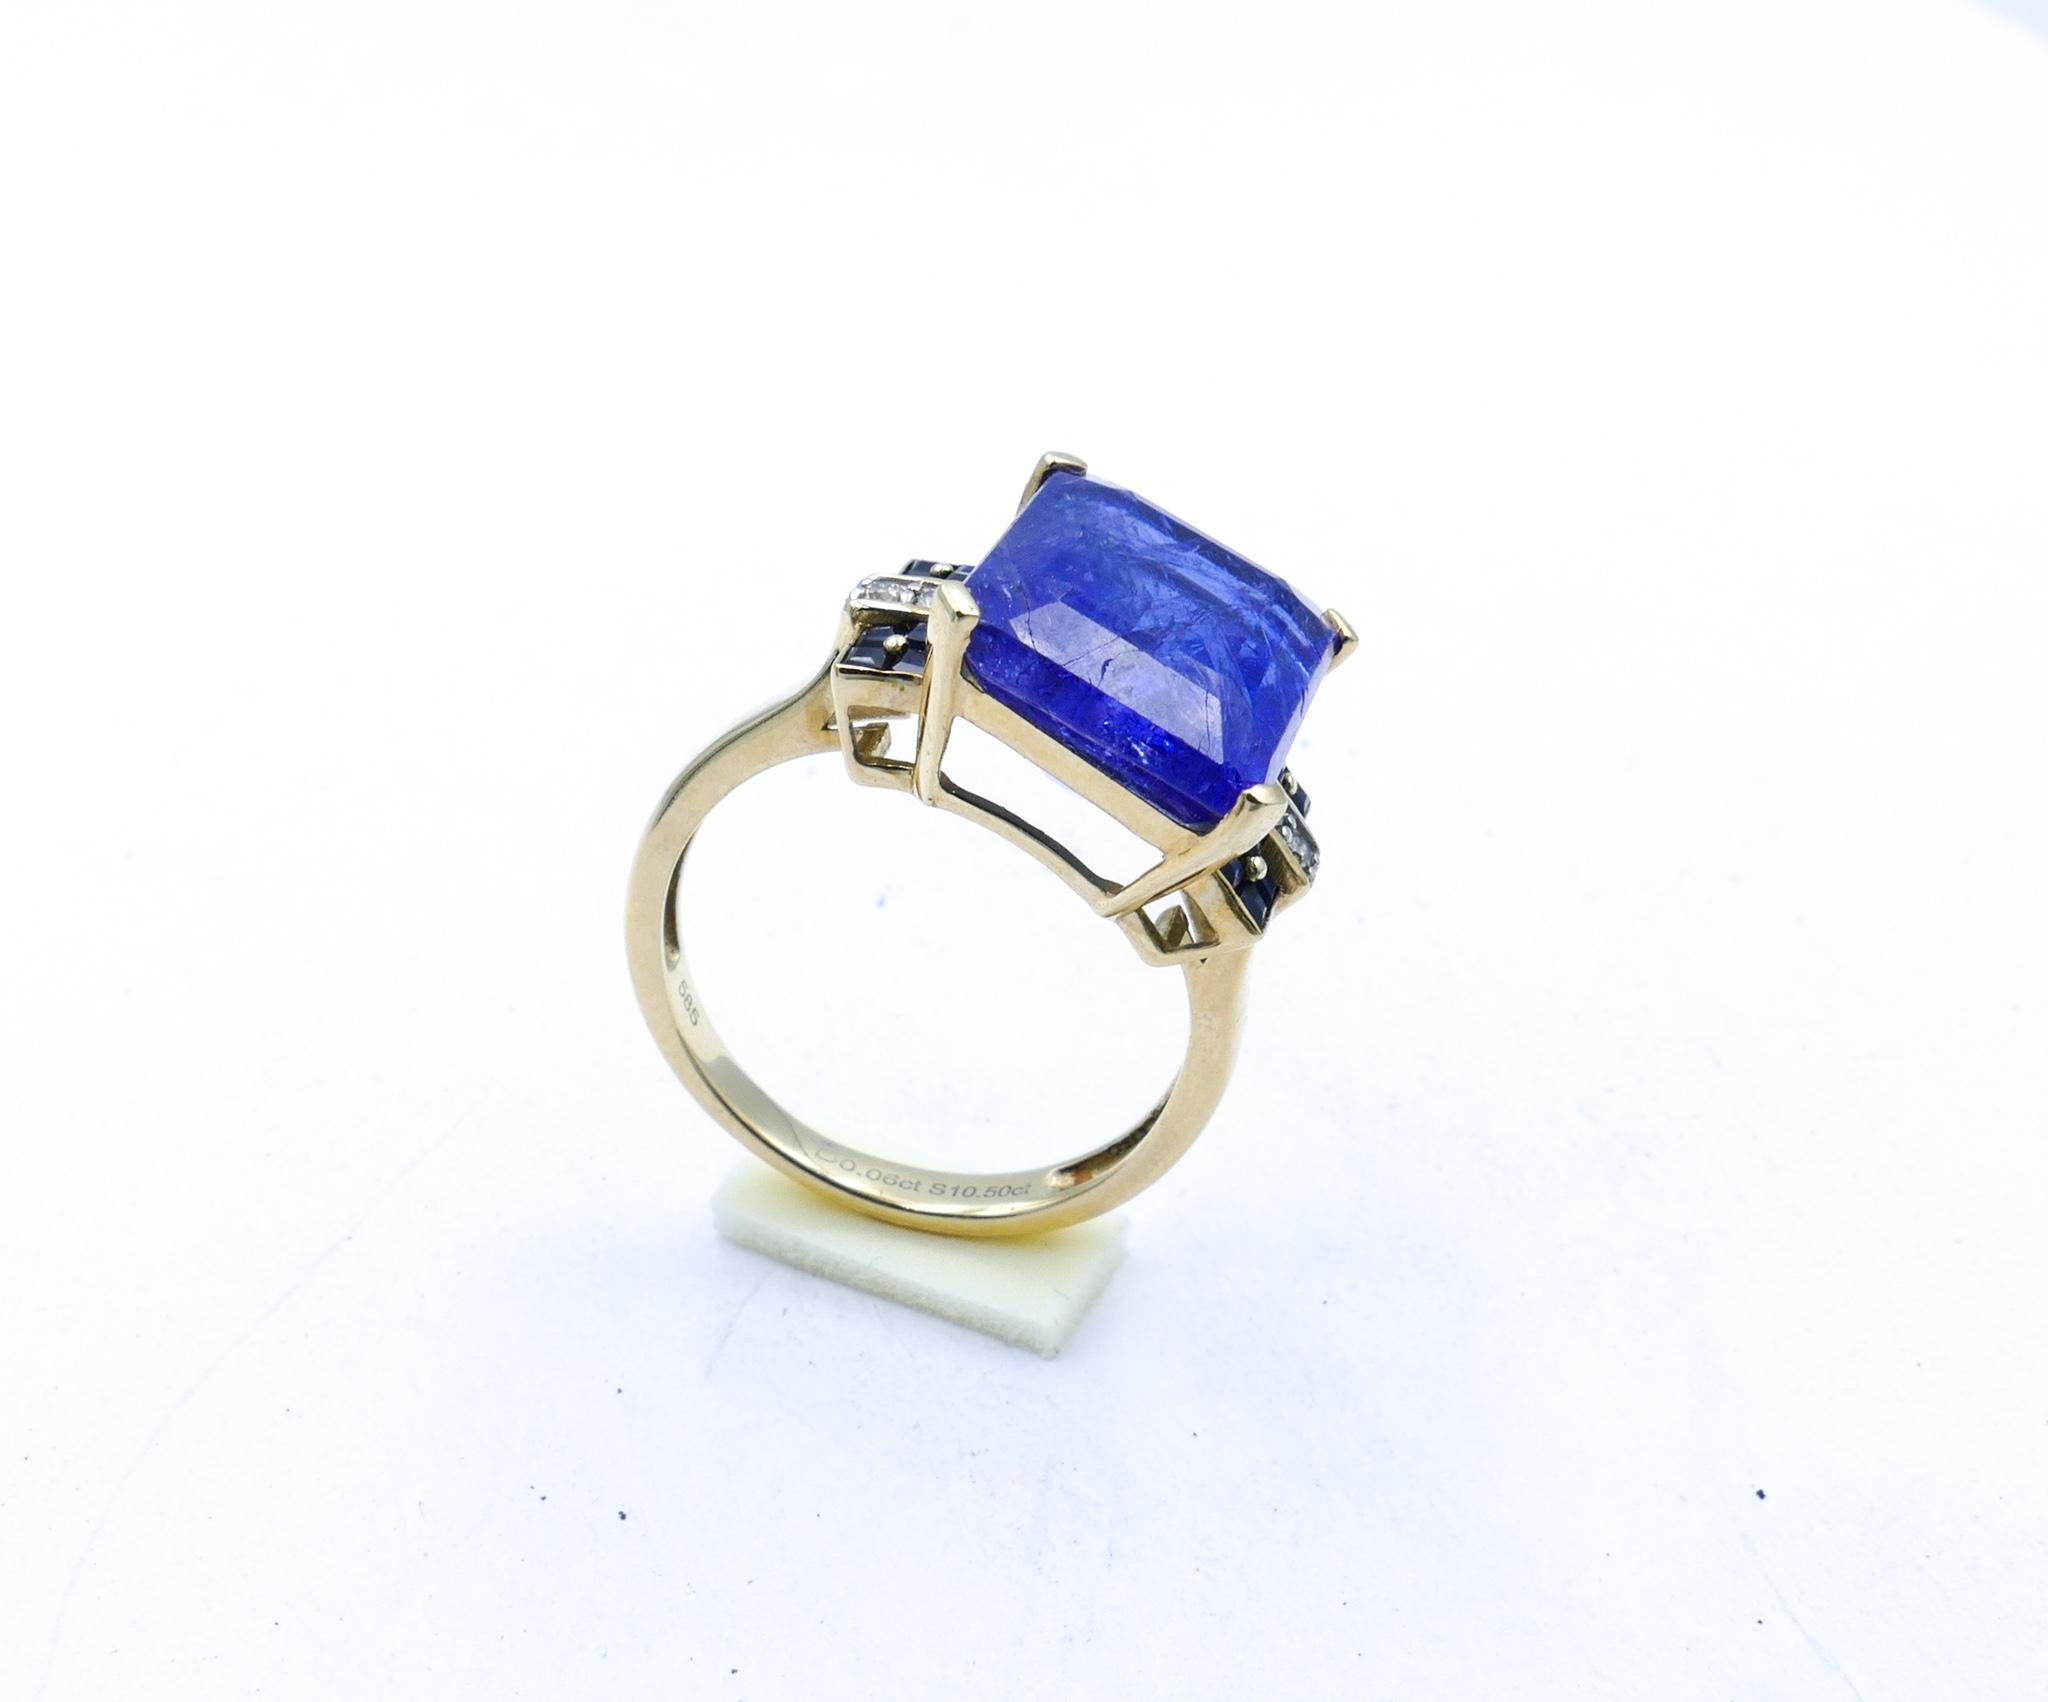 This is a Really different Tanzanite Ring. 
Styled on the Square set style of the ART DECO Period this beautifully crafted Ring looks gorgeous on the hand.

Stunningly large Stone of 10.5 Carats and colour more towards the Blue spectrum more than